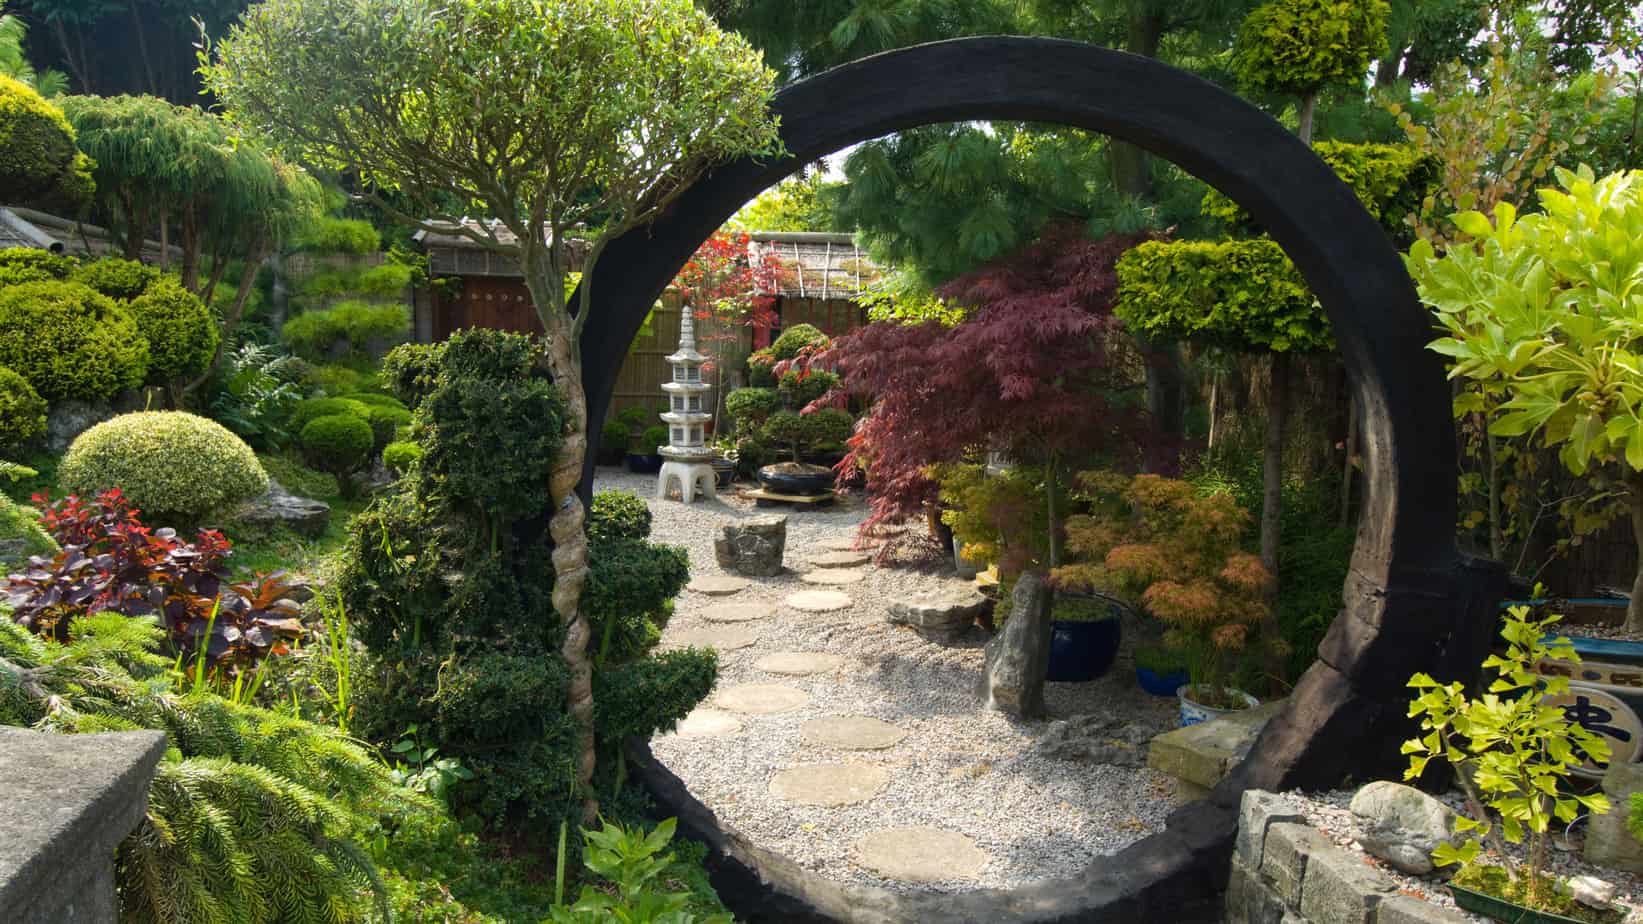 Japanese style garden with moon gate